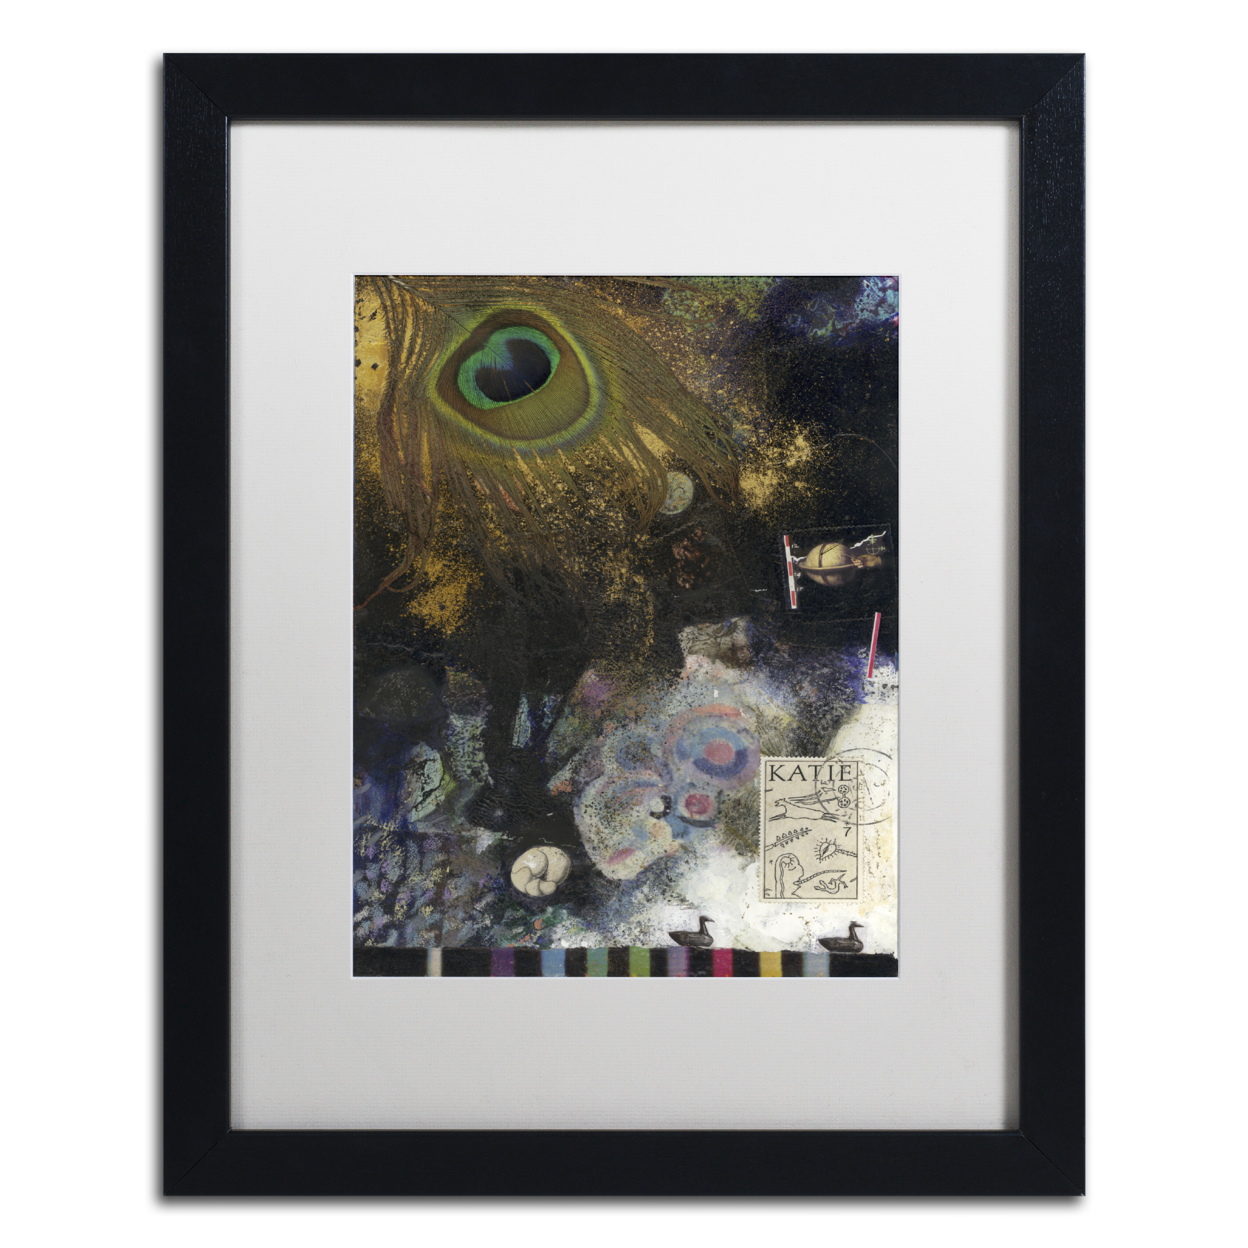 Nick Bantock 'Peacock Feather' Black Wooden Framed Art 18 X 22 Inches